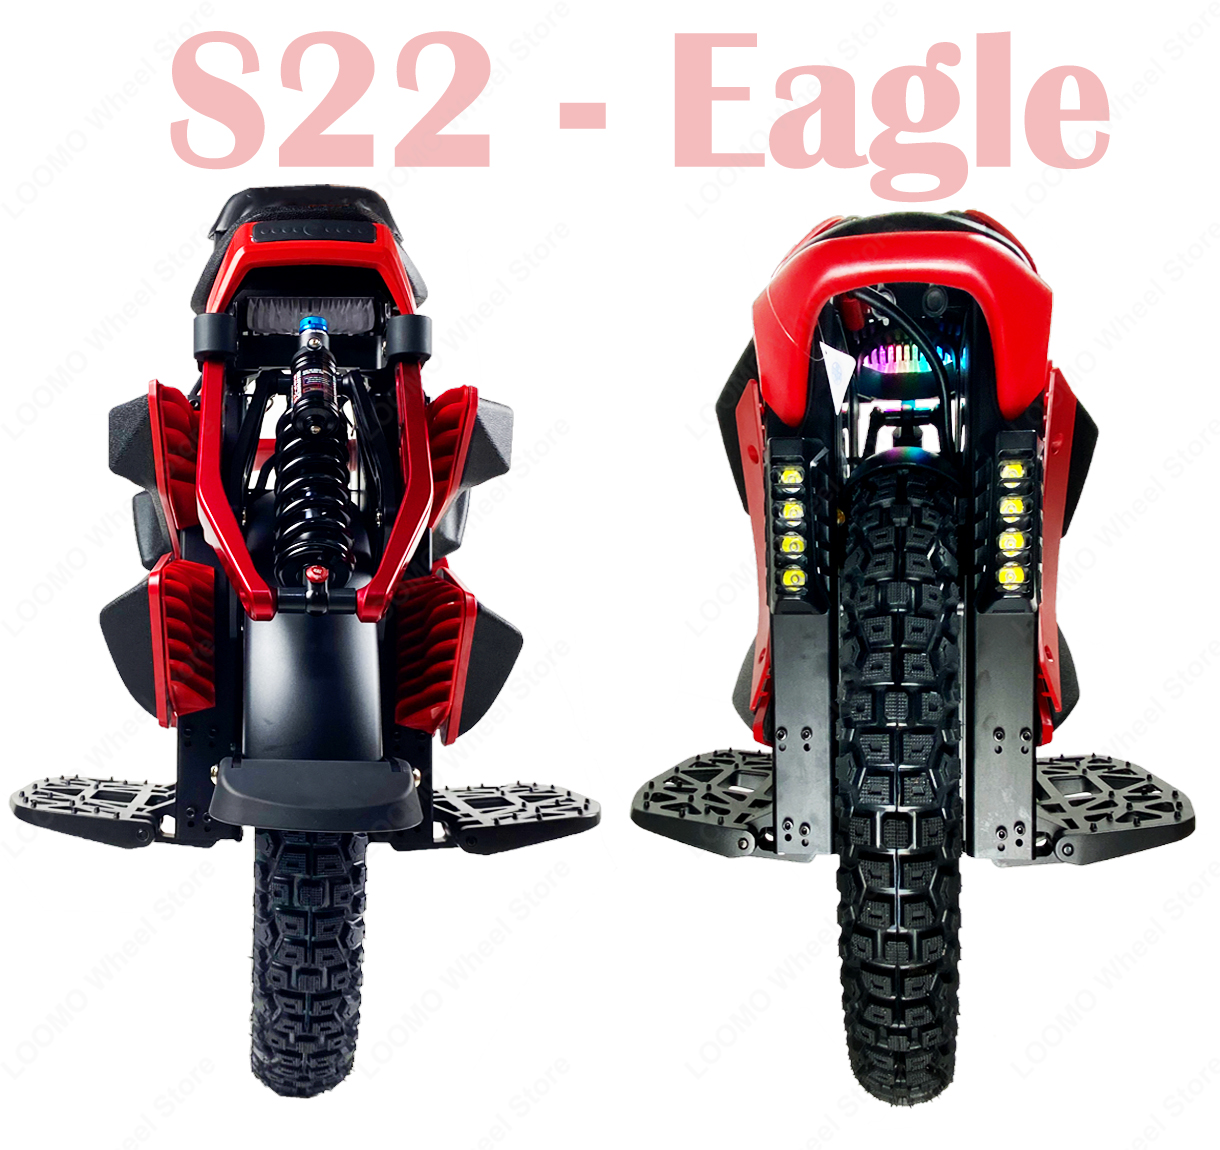 In Stock KinSong S22 Eagle Unicycle 126V 2220Wh Electric Unicycle 3300W Motor 20 Inch Off-road Suspension Electric Unicycle